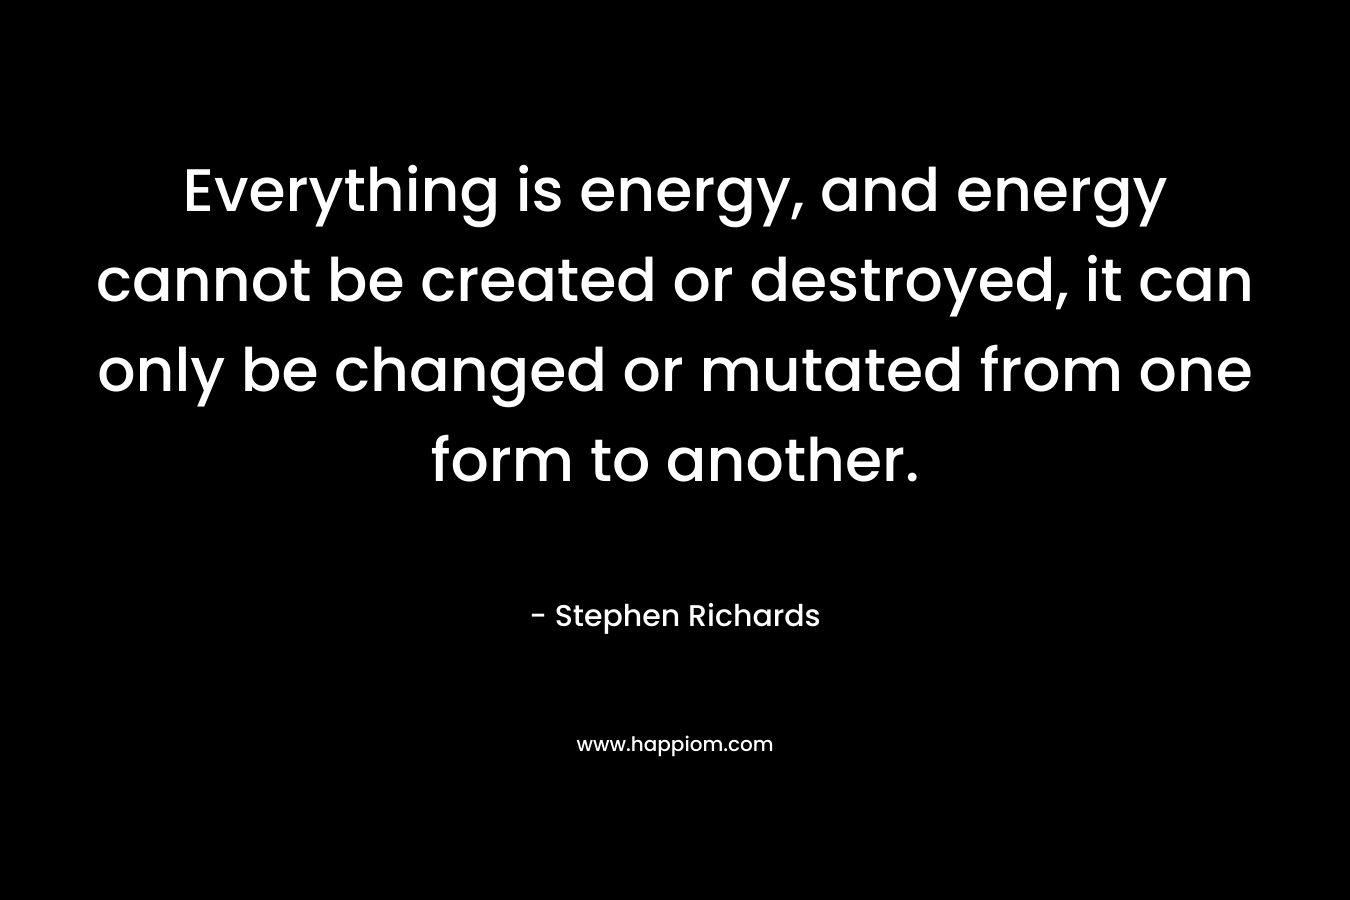 Everything is energy, and energy cannot be created or destroyed, it can only be changed or mutated from one form to another.